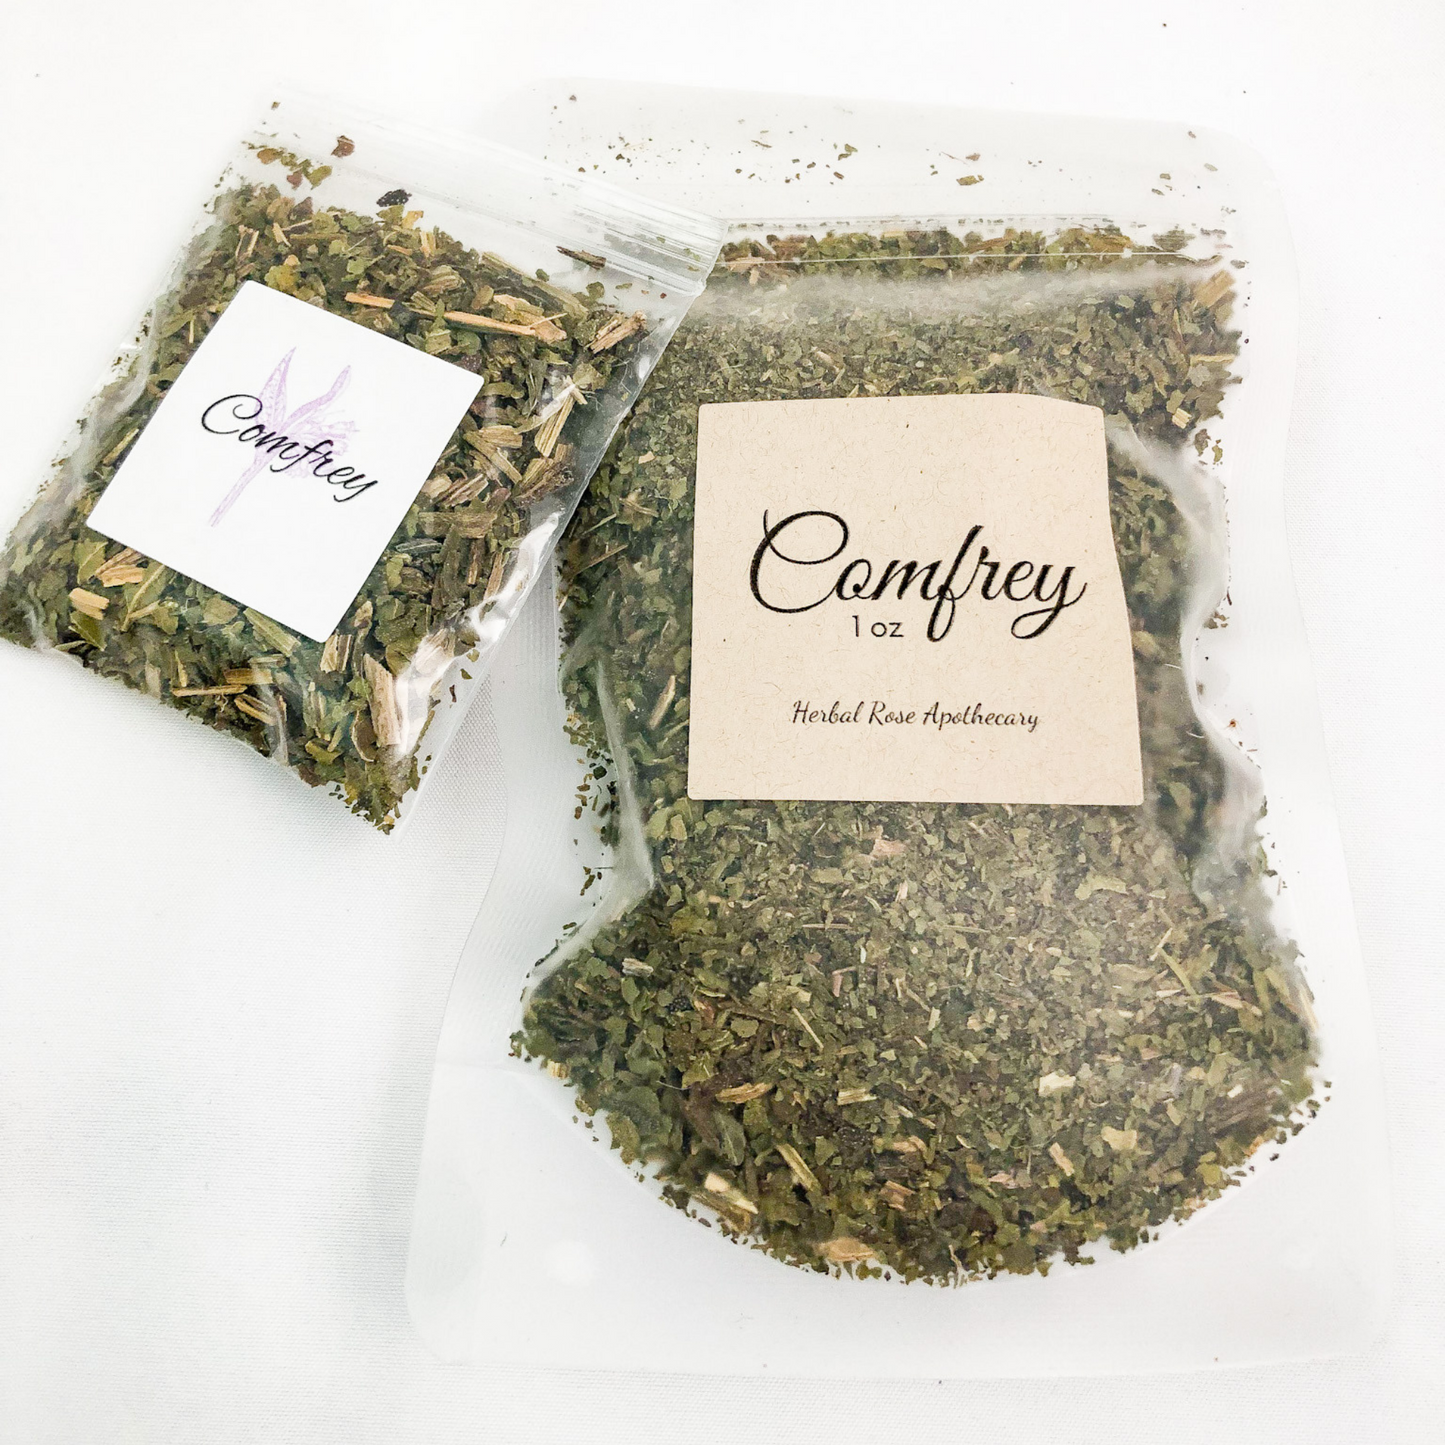 Dried comfrey in clear 1oz bag and clear 8g bag with white background